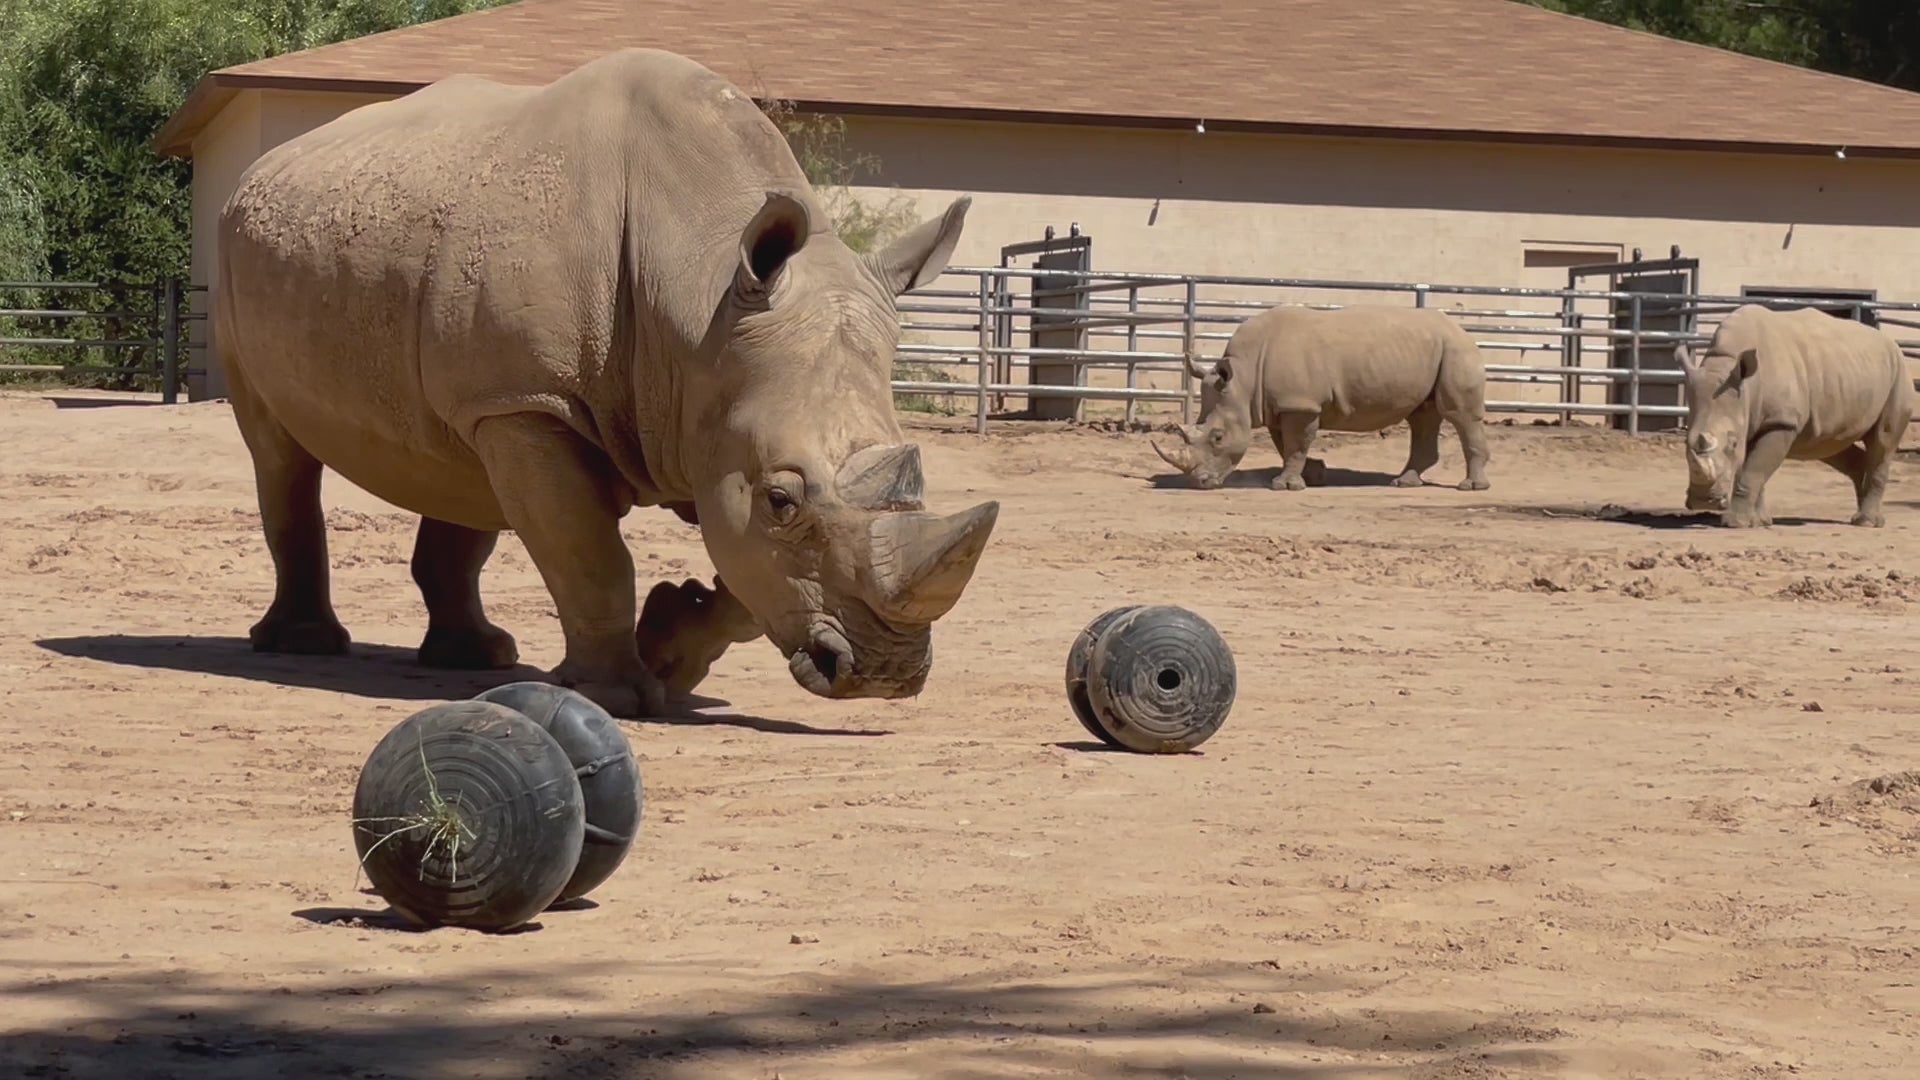 Rhino playing with roller toy